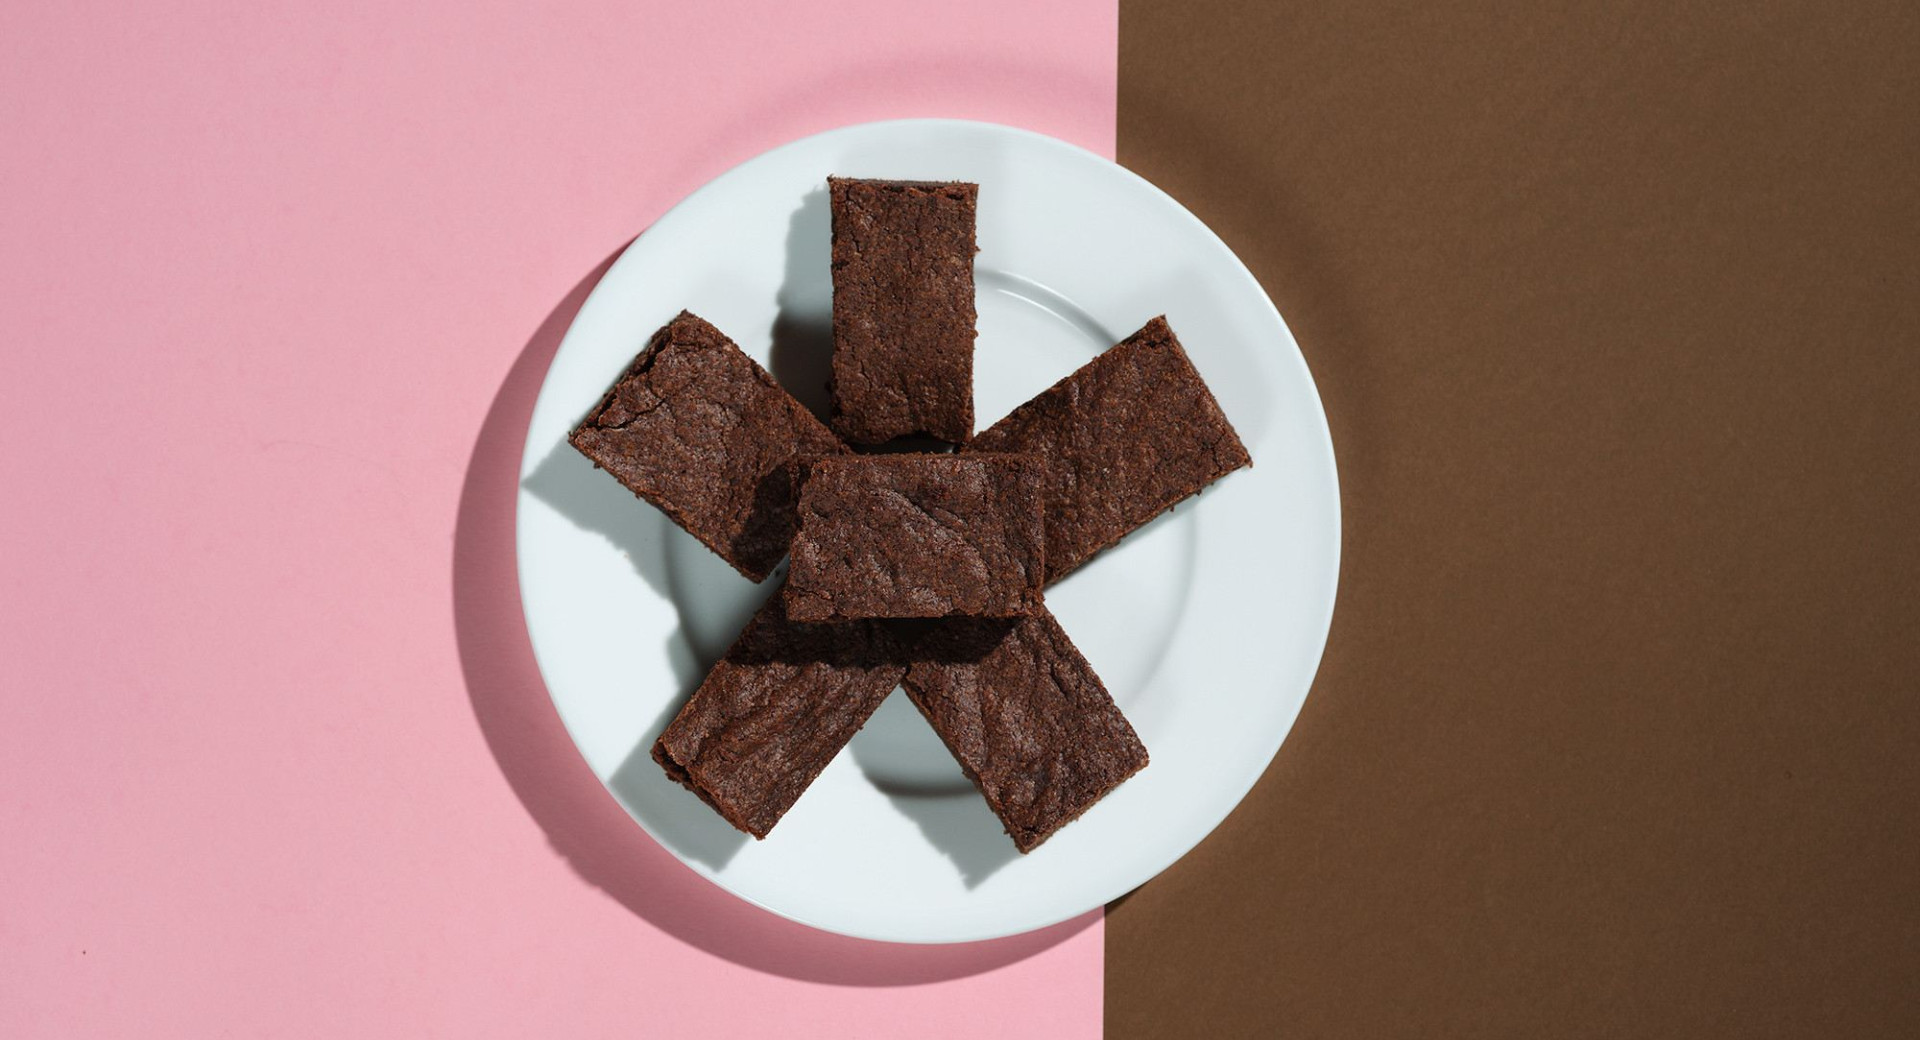 A white plate on a pink and brown base. Chocolate cubes are arranged in a star shape on the plate.